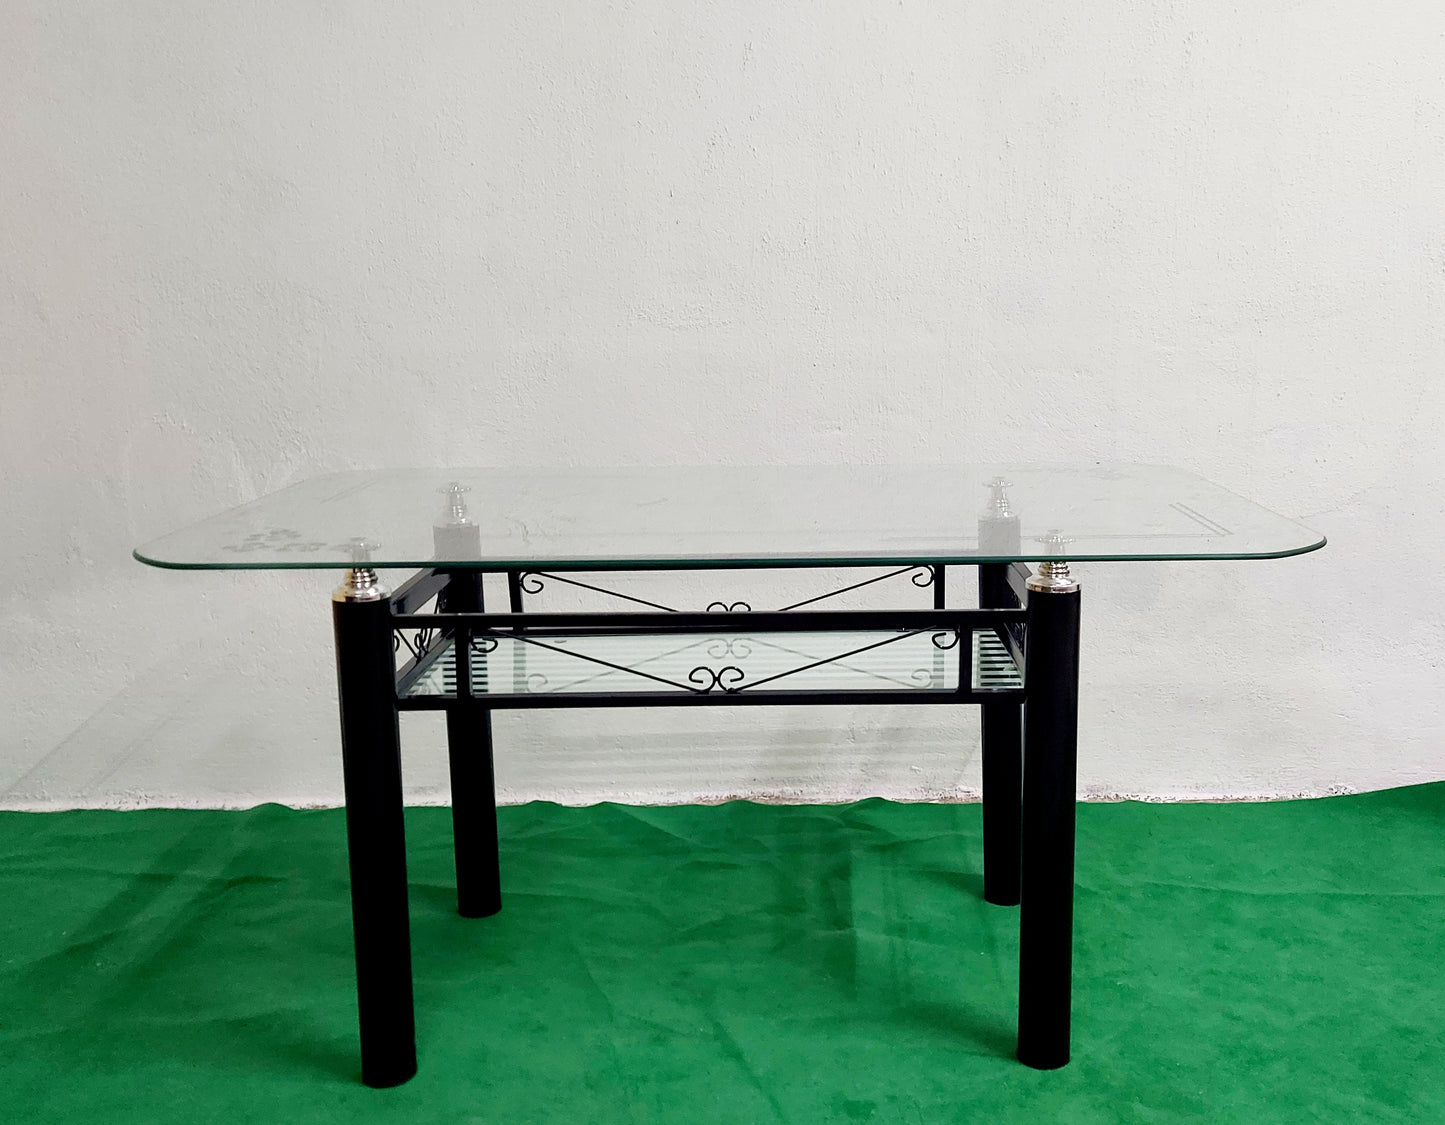 Bowzar Metal and Glass 4 Seater Dining Table Set Dark Brown